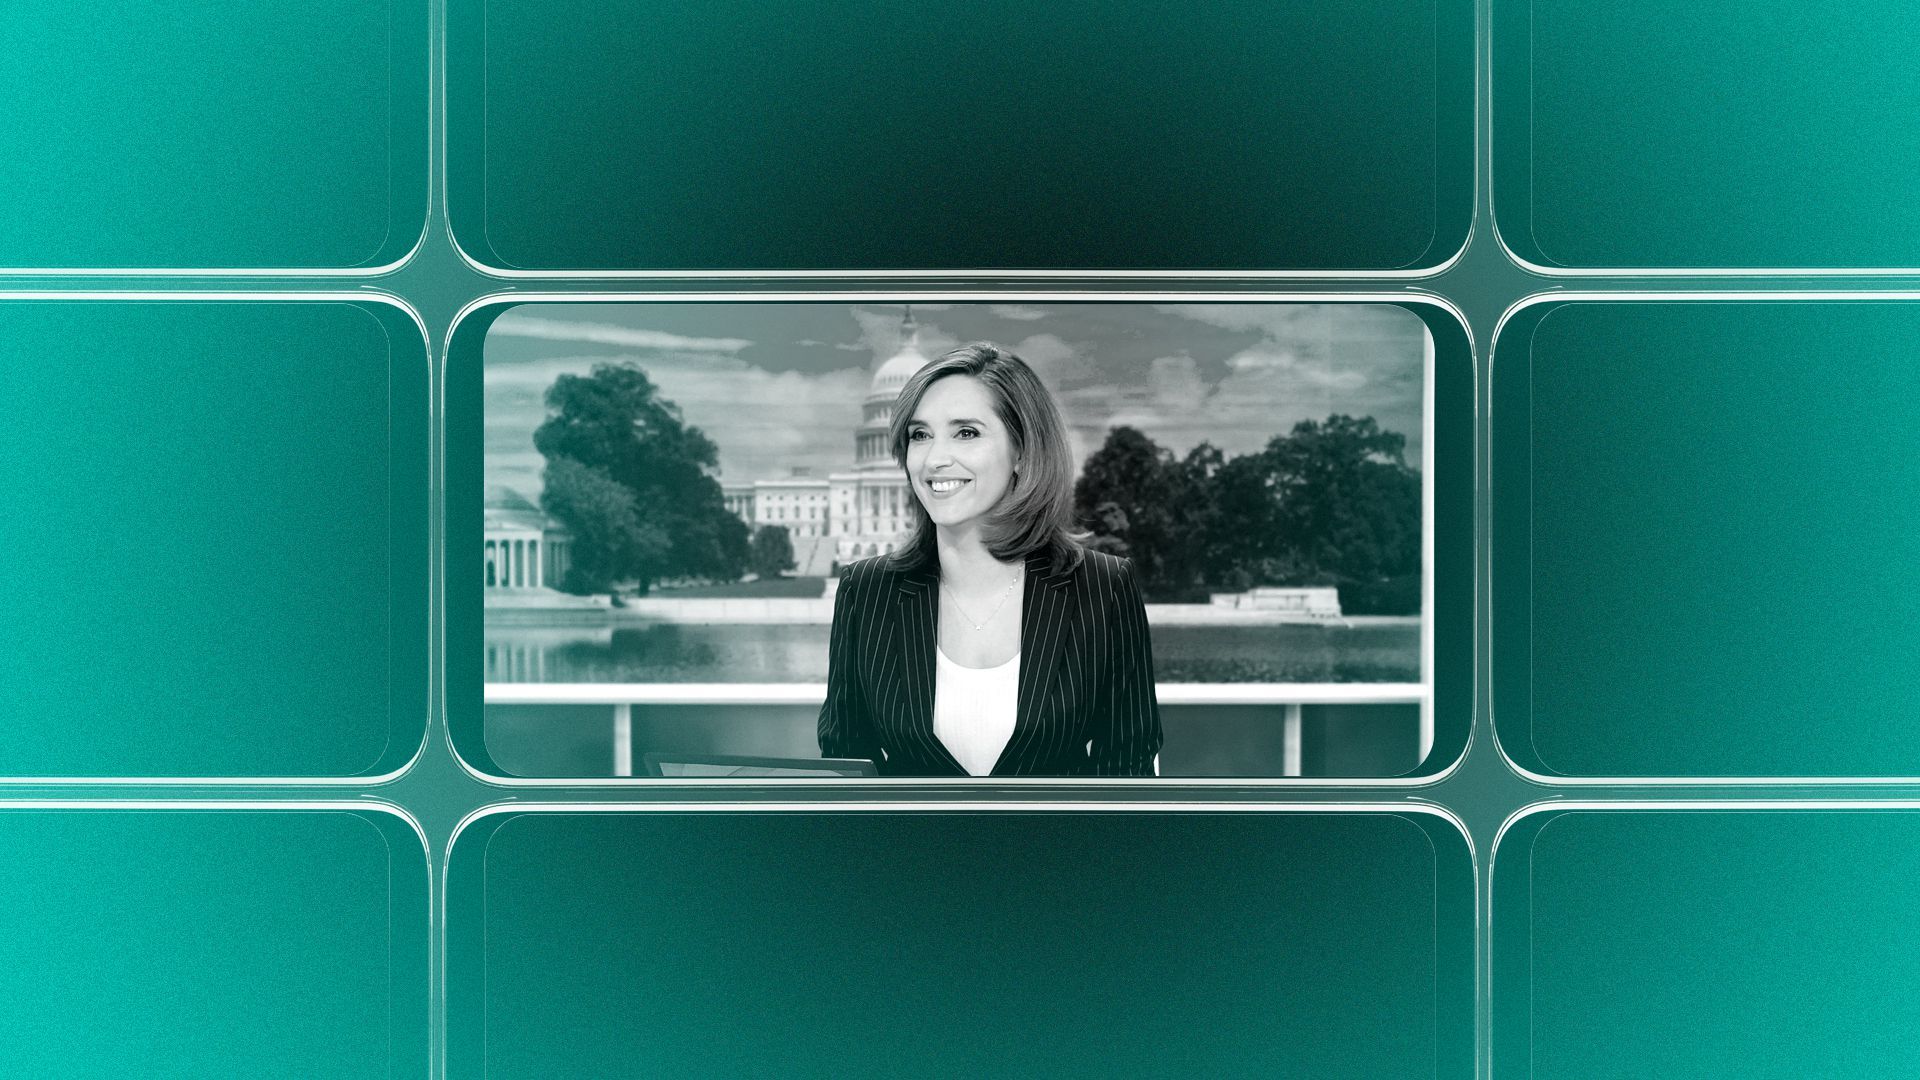 Photo illustration of a grid of smartphone screens, the center one showing an image of Margaret Brennan.